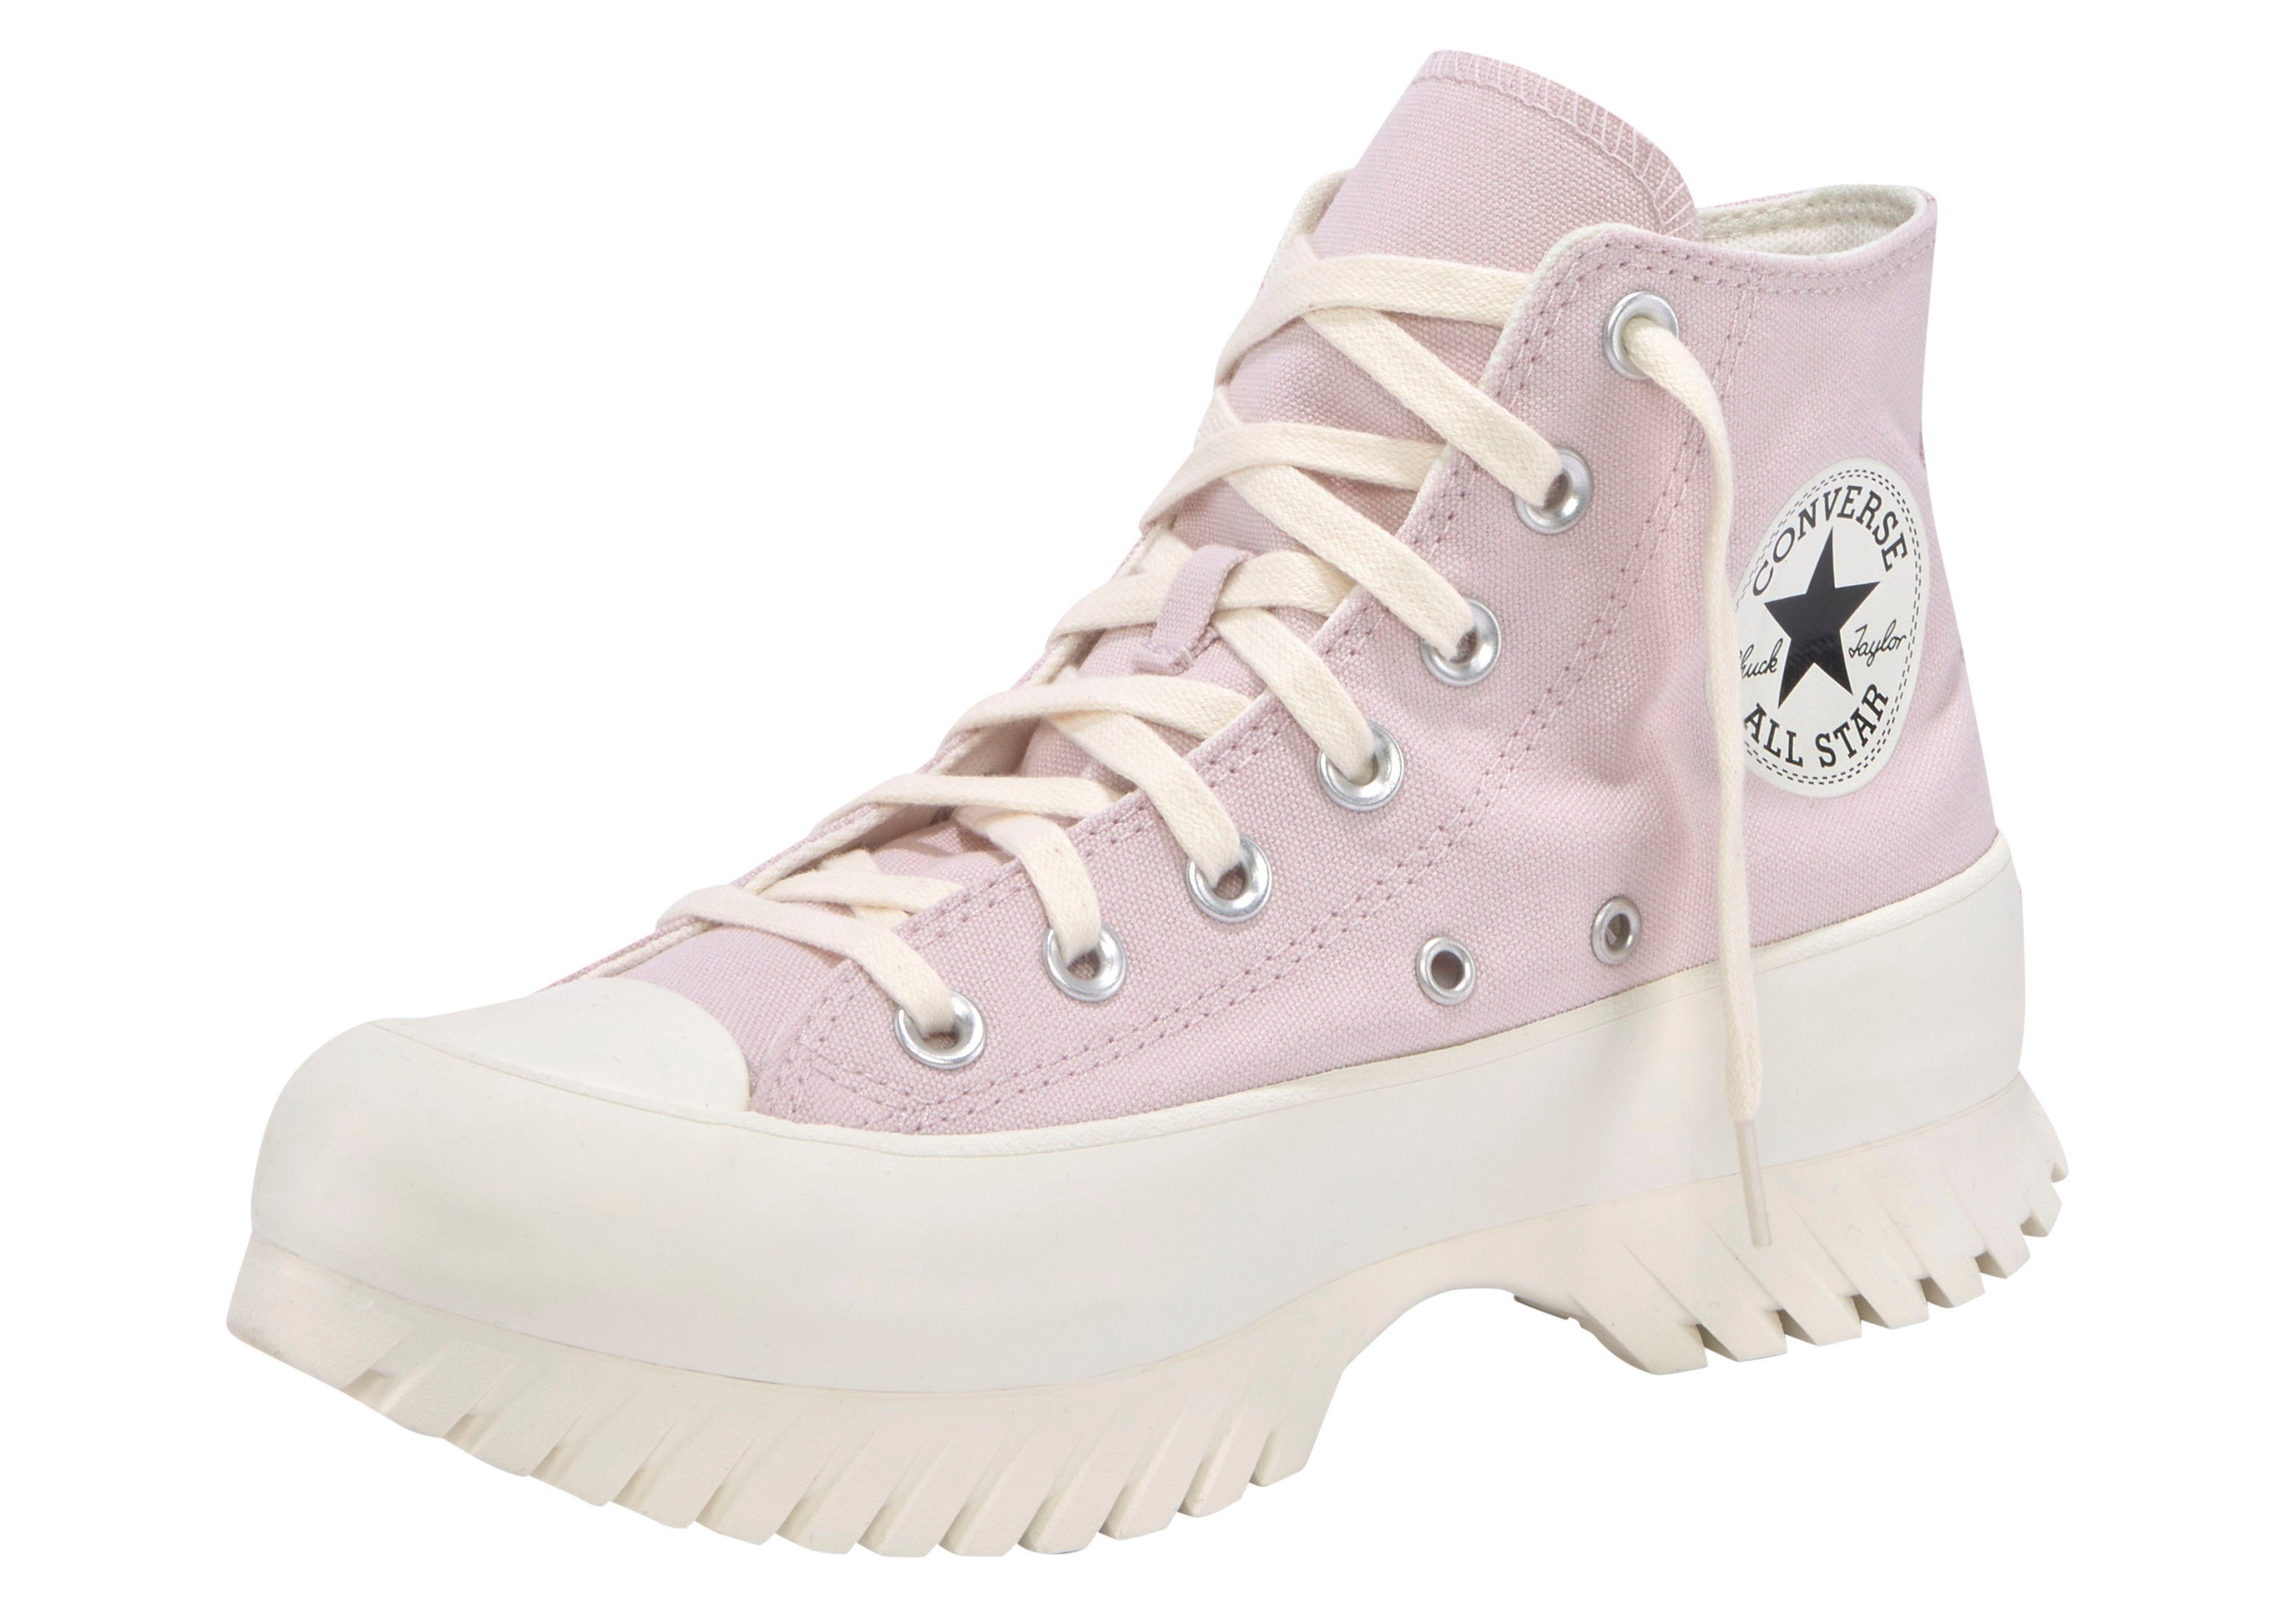 Converse »CHUCK TAYLOR ALL STAR LUGGED 2.0 HI« Plateausneaker online kaufen  | OTTO